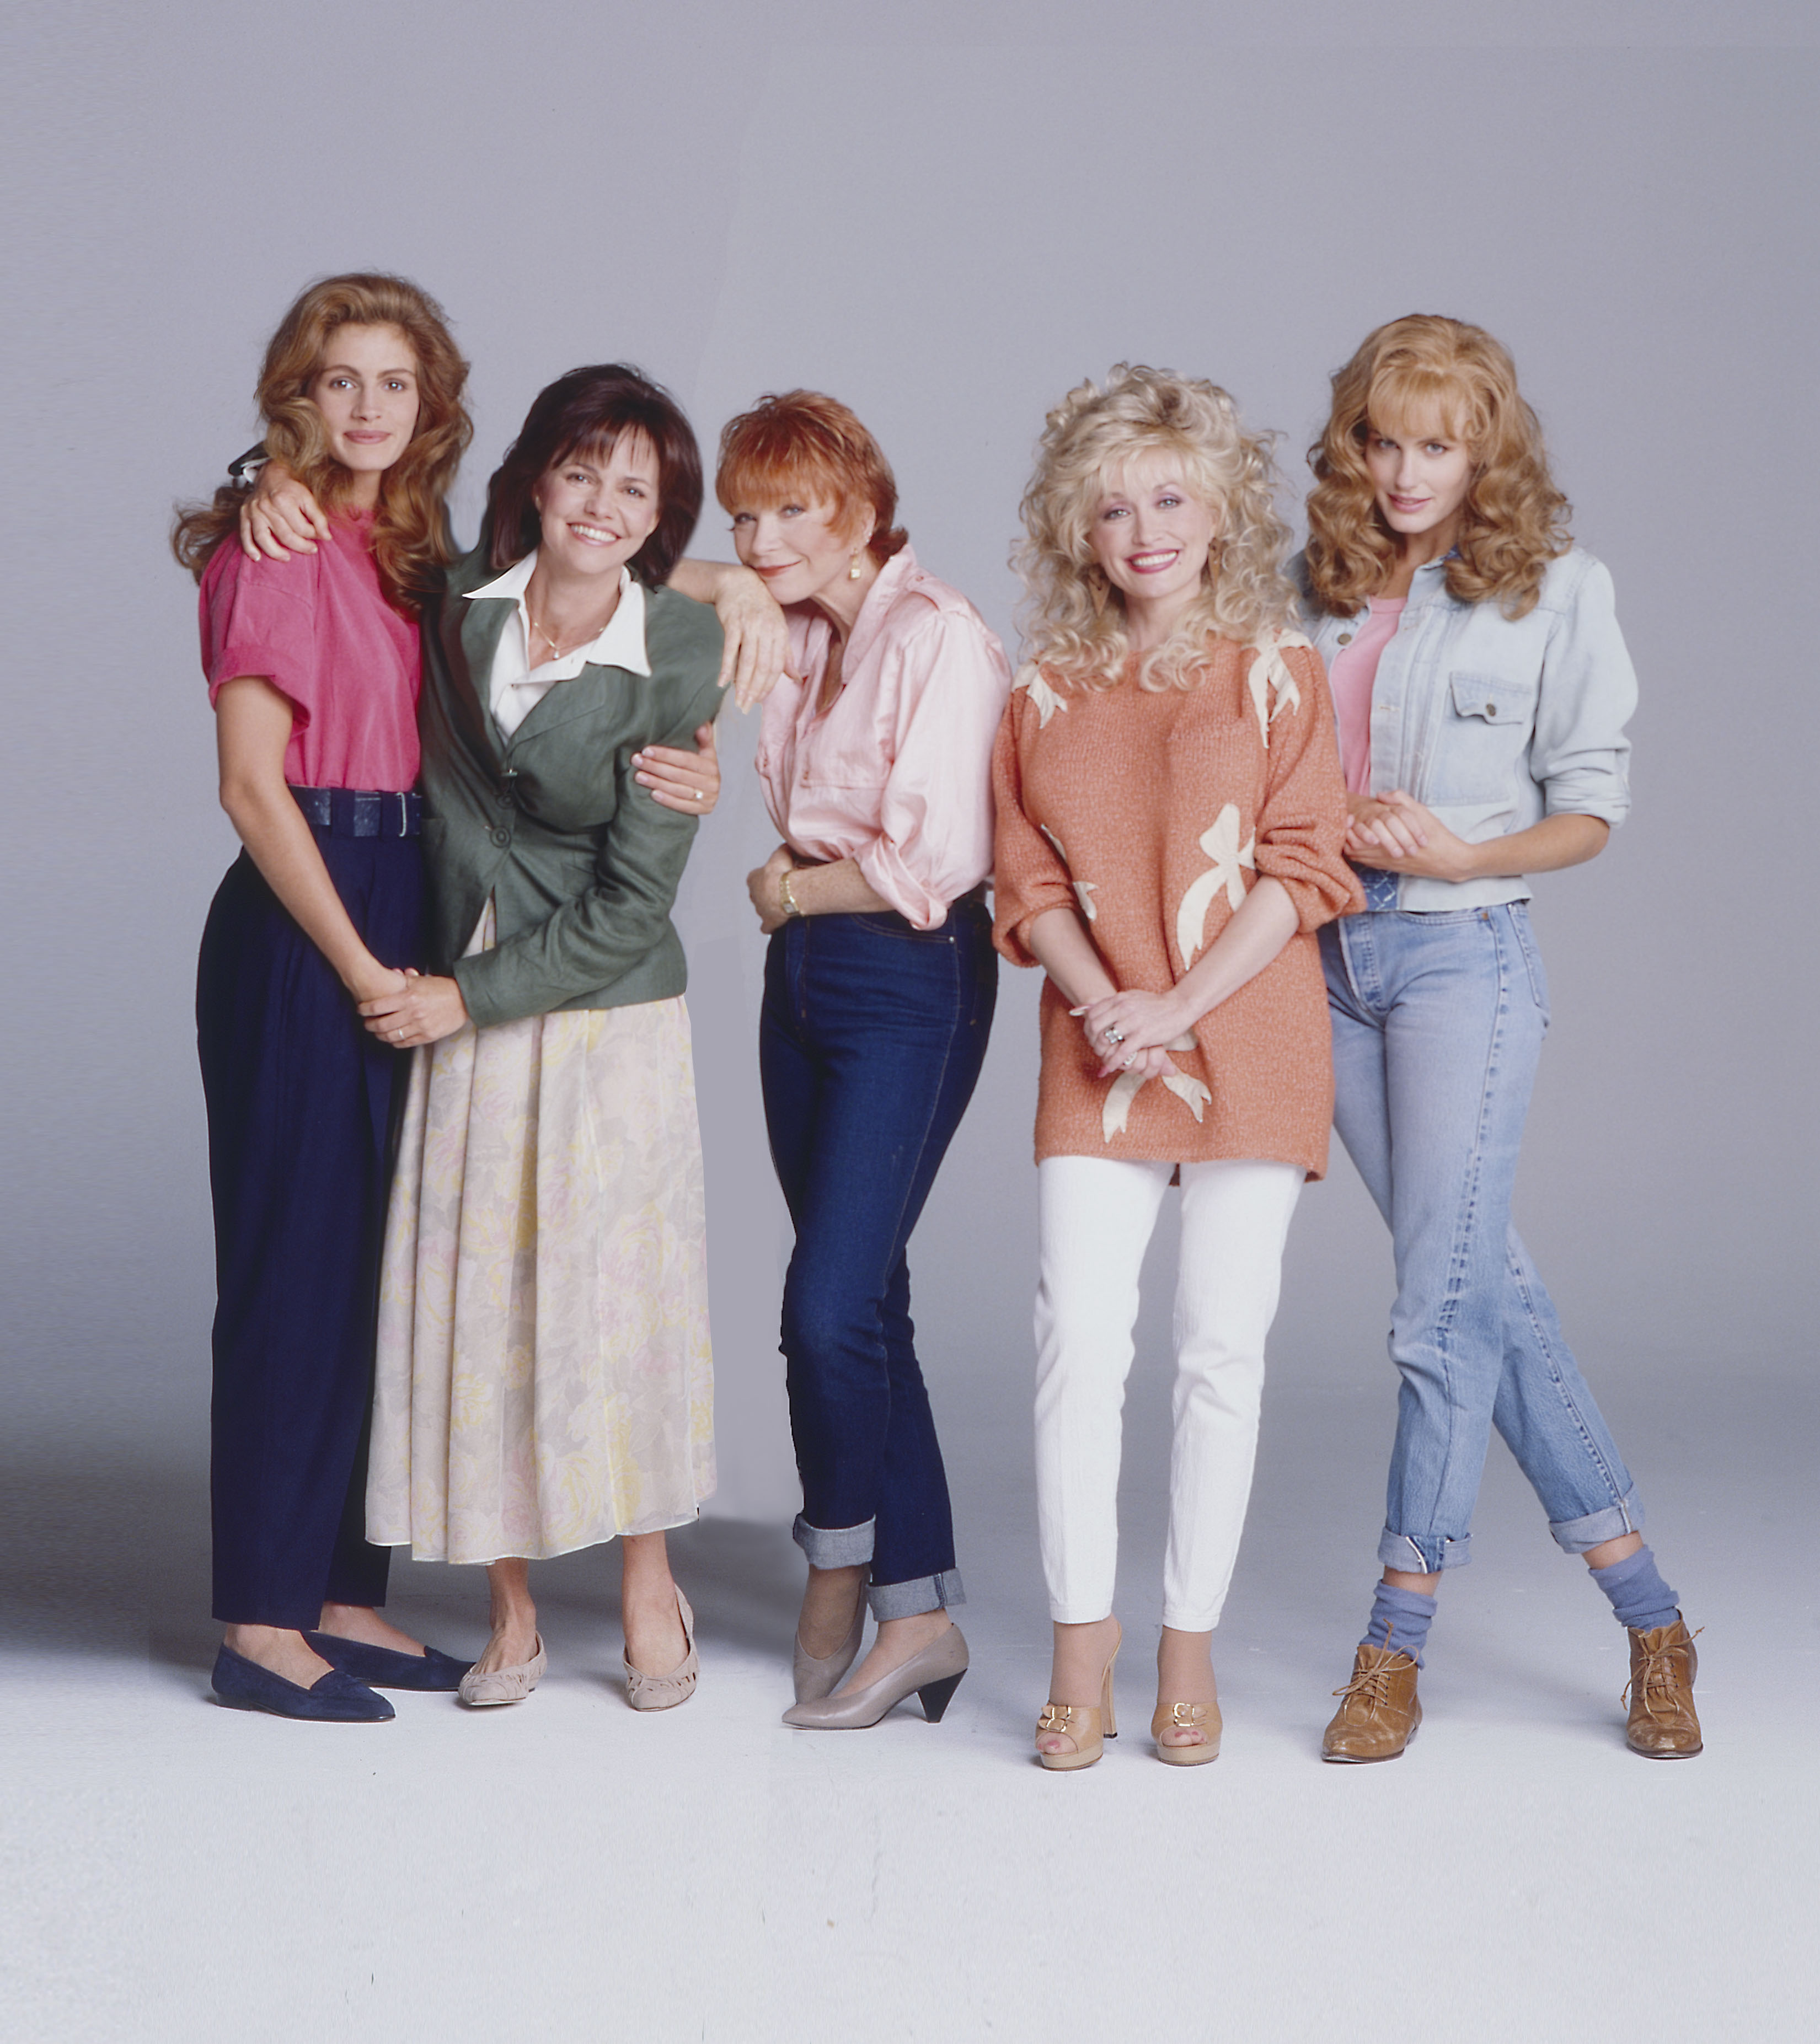 Shirley pictured with Julia Roberts, Sally Field, Dolly Parton, and Daryl Hannah in a promotional still for 1989's Steel Magnolias